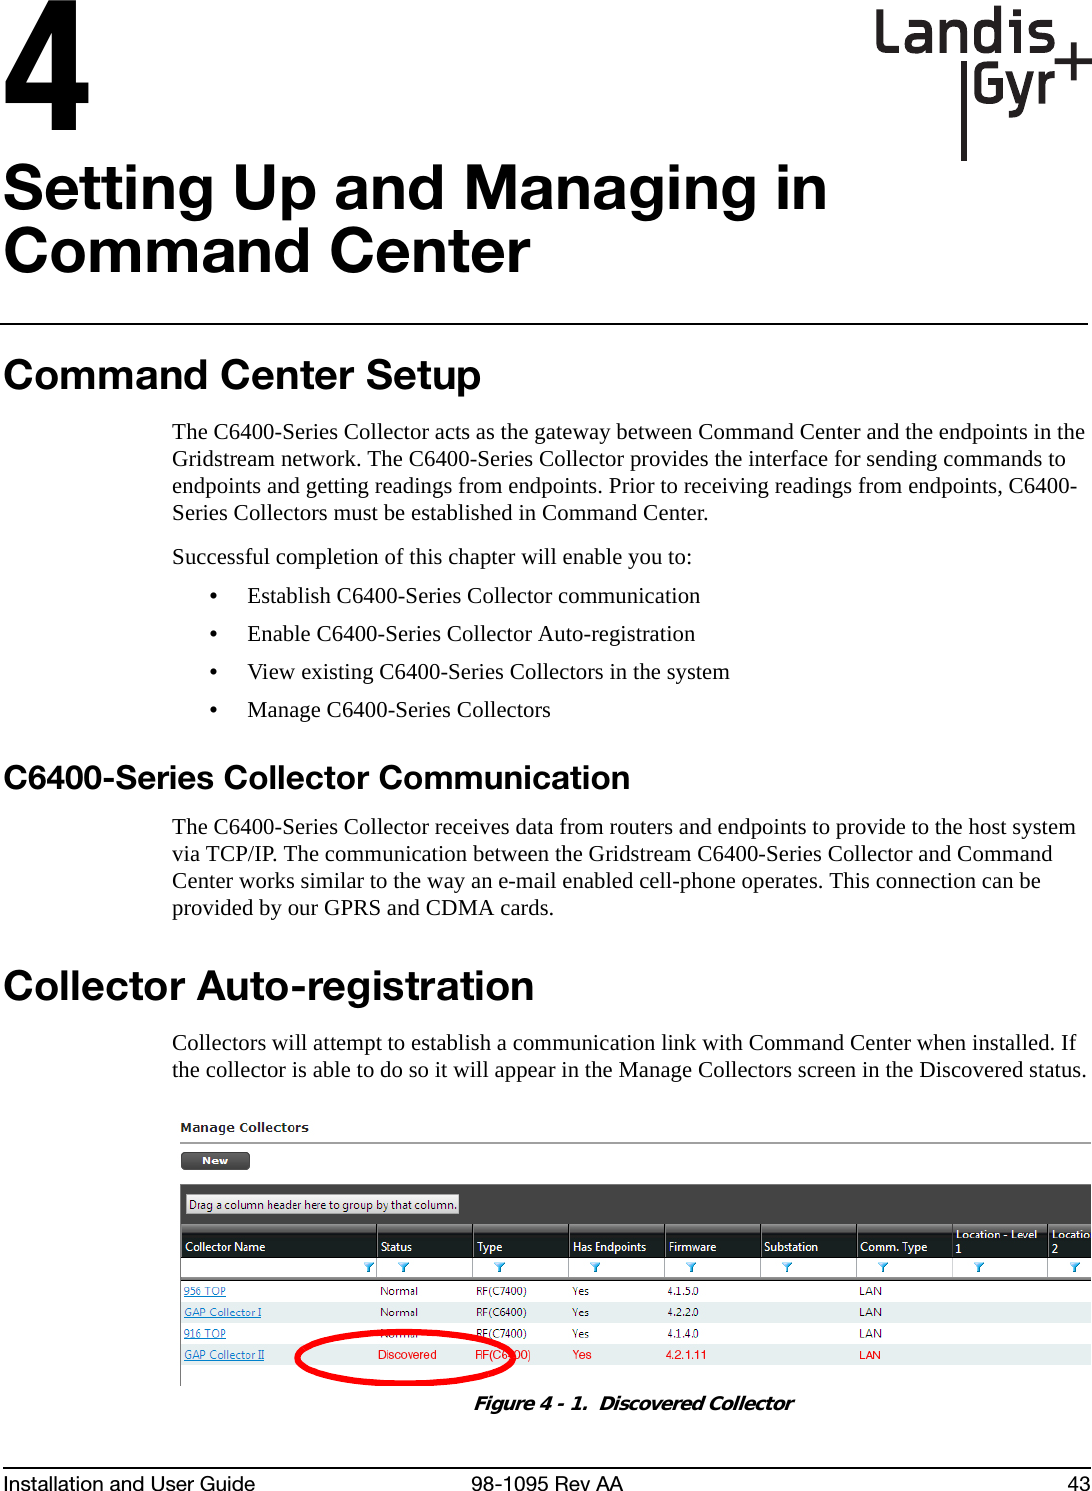 Installation and User Guide 98-1095 Rev AA 434Setting Up and Managing in Command CenterCommand Center SetupThe C6400-Series Collector acts as the gateway between Command Center and the endpoints in the Gridstream network. The C6400-Series Collector provides the interface for sending commands to endpoints and getting readings from endpoints. Prior to receiving readings from endpoints, C6400-Series Collectors must be established in Command Center.Successful completion of this chapter will enable you to:•Establish C6400-Series Collector communication•Enable C6400-Series Collector Auto-registration•View existing C6400-Series Collectors in the system•Manage C6400-Series CollectorsC6400-Series Collector CommunicationThe C6400-Series Collector receives data from routers and endpoints to provide to the host system via TCP/IP. The communication between the Gridstream C6400-Series Collector and Command Center works similar to the way an e-mail enabled cell-phone operates. This connection can be provided by our GPRS and CDMA cards.Collector Auto-registrationCollectors will attempt to establish a communication link with Command Center when installed. If the collector is able to do so it will appear in the Manage Collectors screen in the Discovered status.Figure 4 - 1.  Discovered Collector